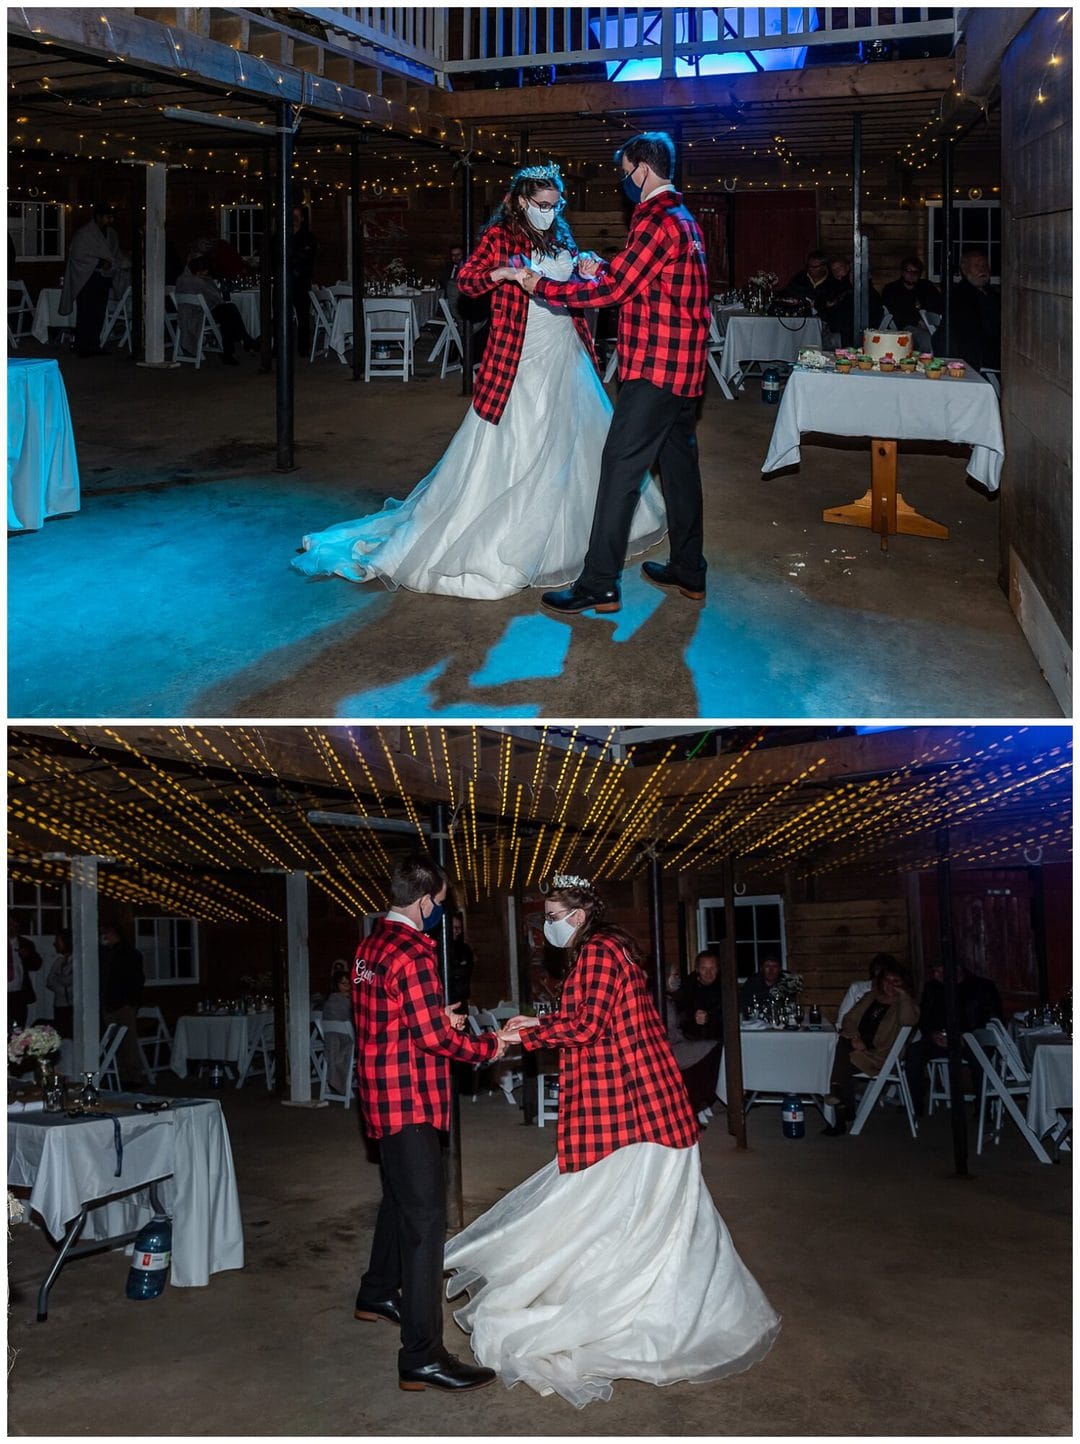 The bride and groom dance together during their wedding reception at the Kinley Farm in Lunenburg, NS.